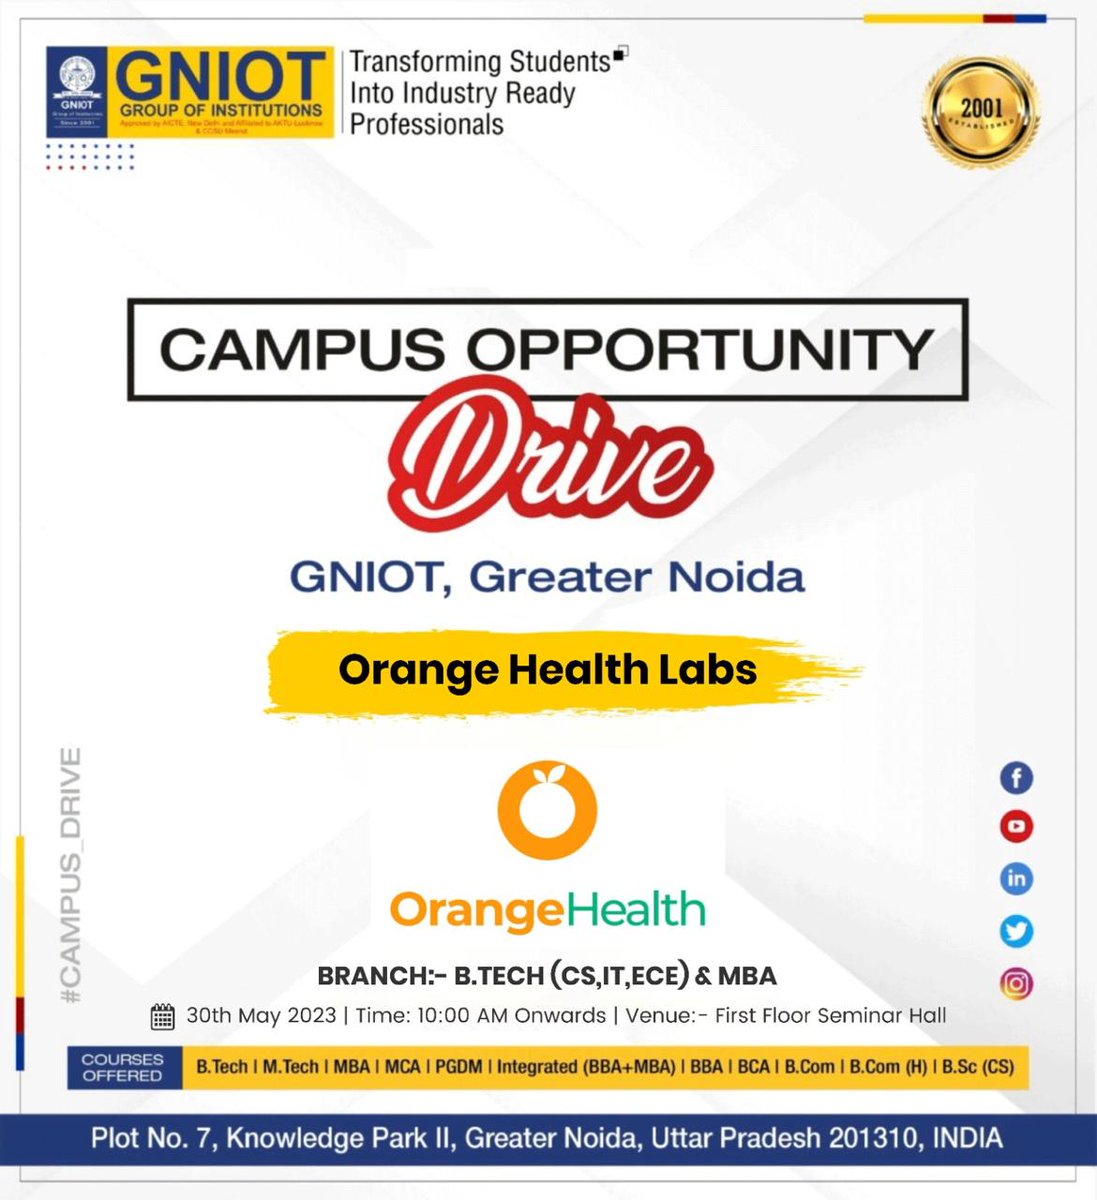 We are Organising Campus Drive for B. Tech & MBA Students.

Visit our Website: gniotgroup.edu.in
Toll Free No.: 18002746969 

#GNIOT #MBA #GreaterNoida #GreaterNoidaCollege #institute #CampusDrive #College #Placement #students